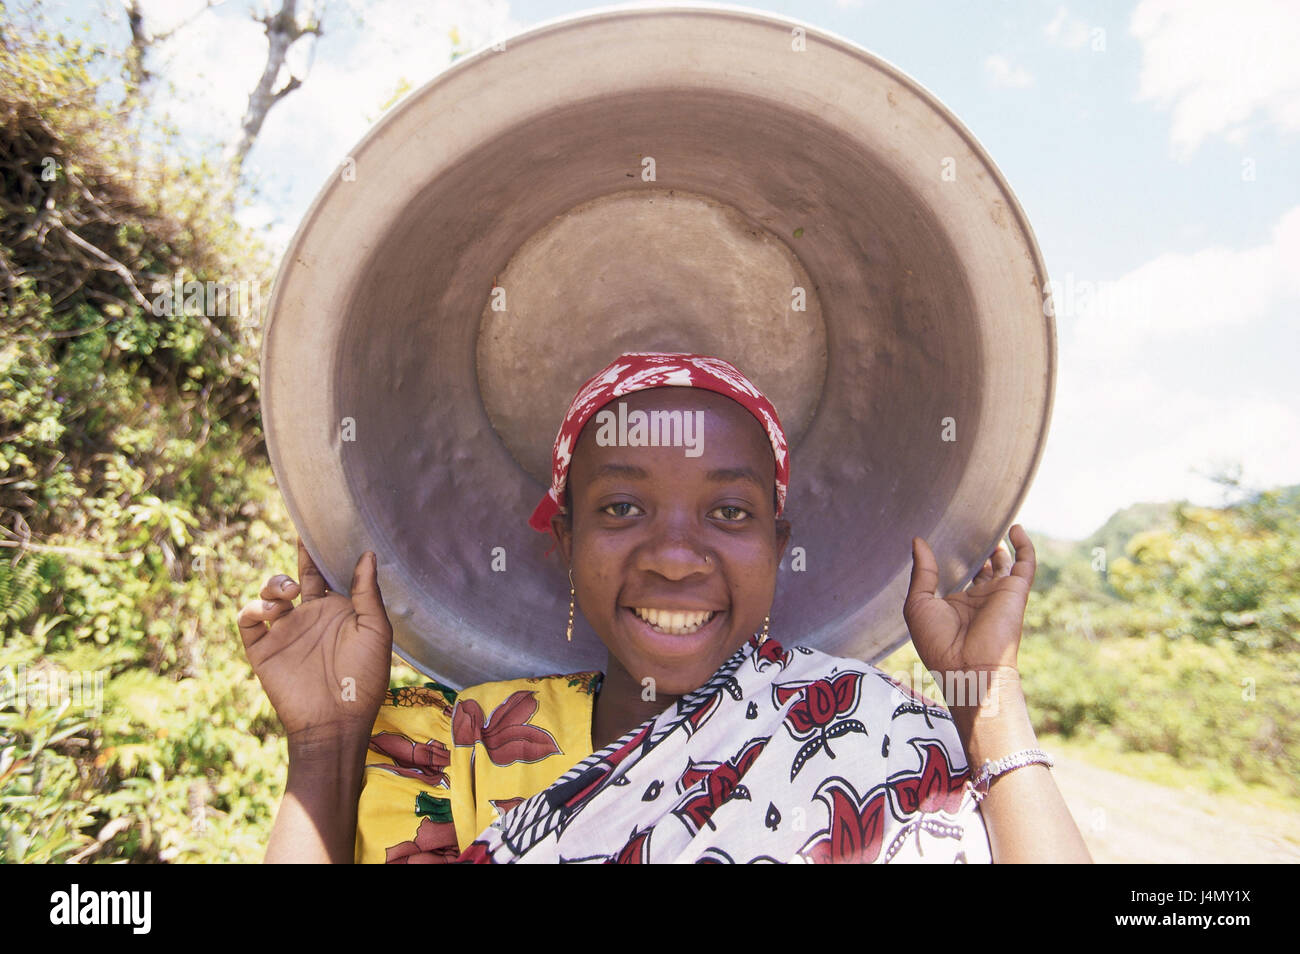 The Comoro Archipelago, island Anjouan, Dindi, girl, happily, headscarf, bowl, carries, portrait, no model release! Africa, Indian ocean, island state, Nzwani, non-whites, young persons, swarthy, swarthy, locals, nasal connectors, headgear, cloth, religiously, faith, view camera, smile, metal bowl, outside Stock Photo